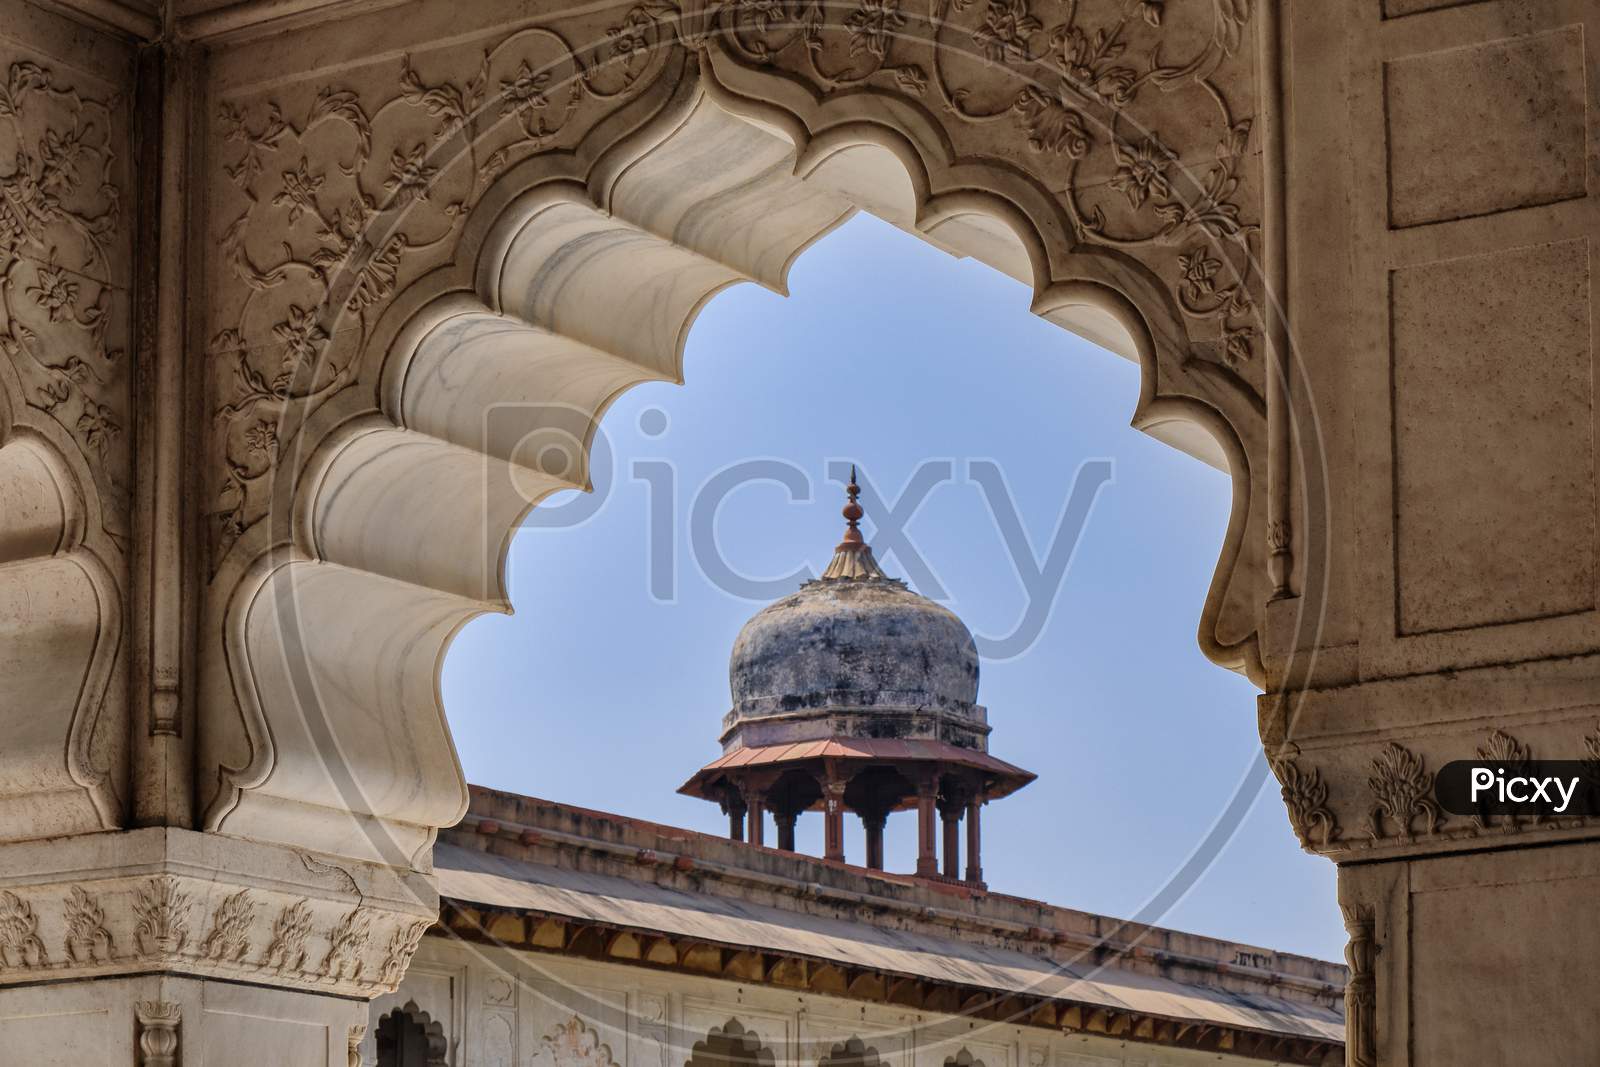 Diwan-I-Khas (Hall Of Private Audiences) Pavilion In Agra Fort, Agra, India